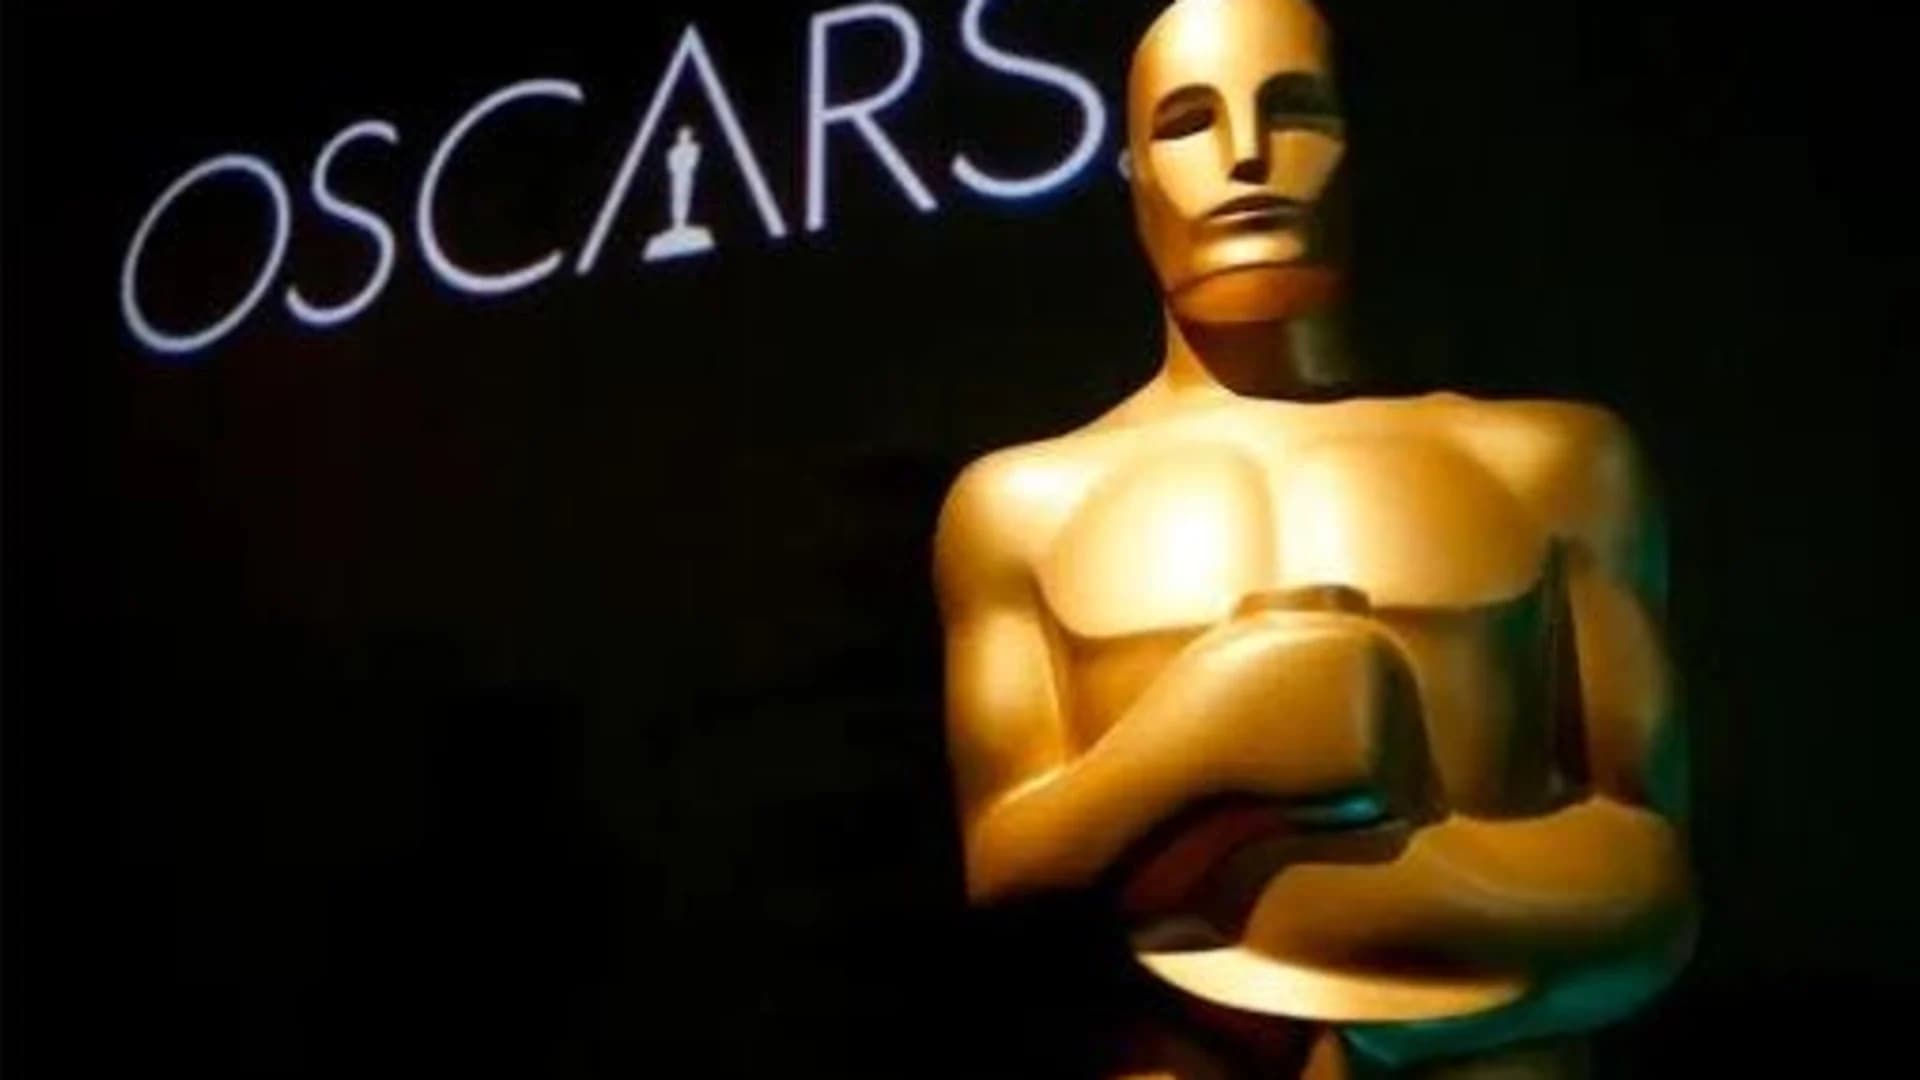 New Jersey becomes first US state to take legal Oscars bets